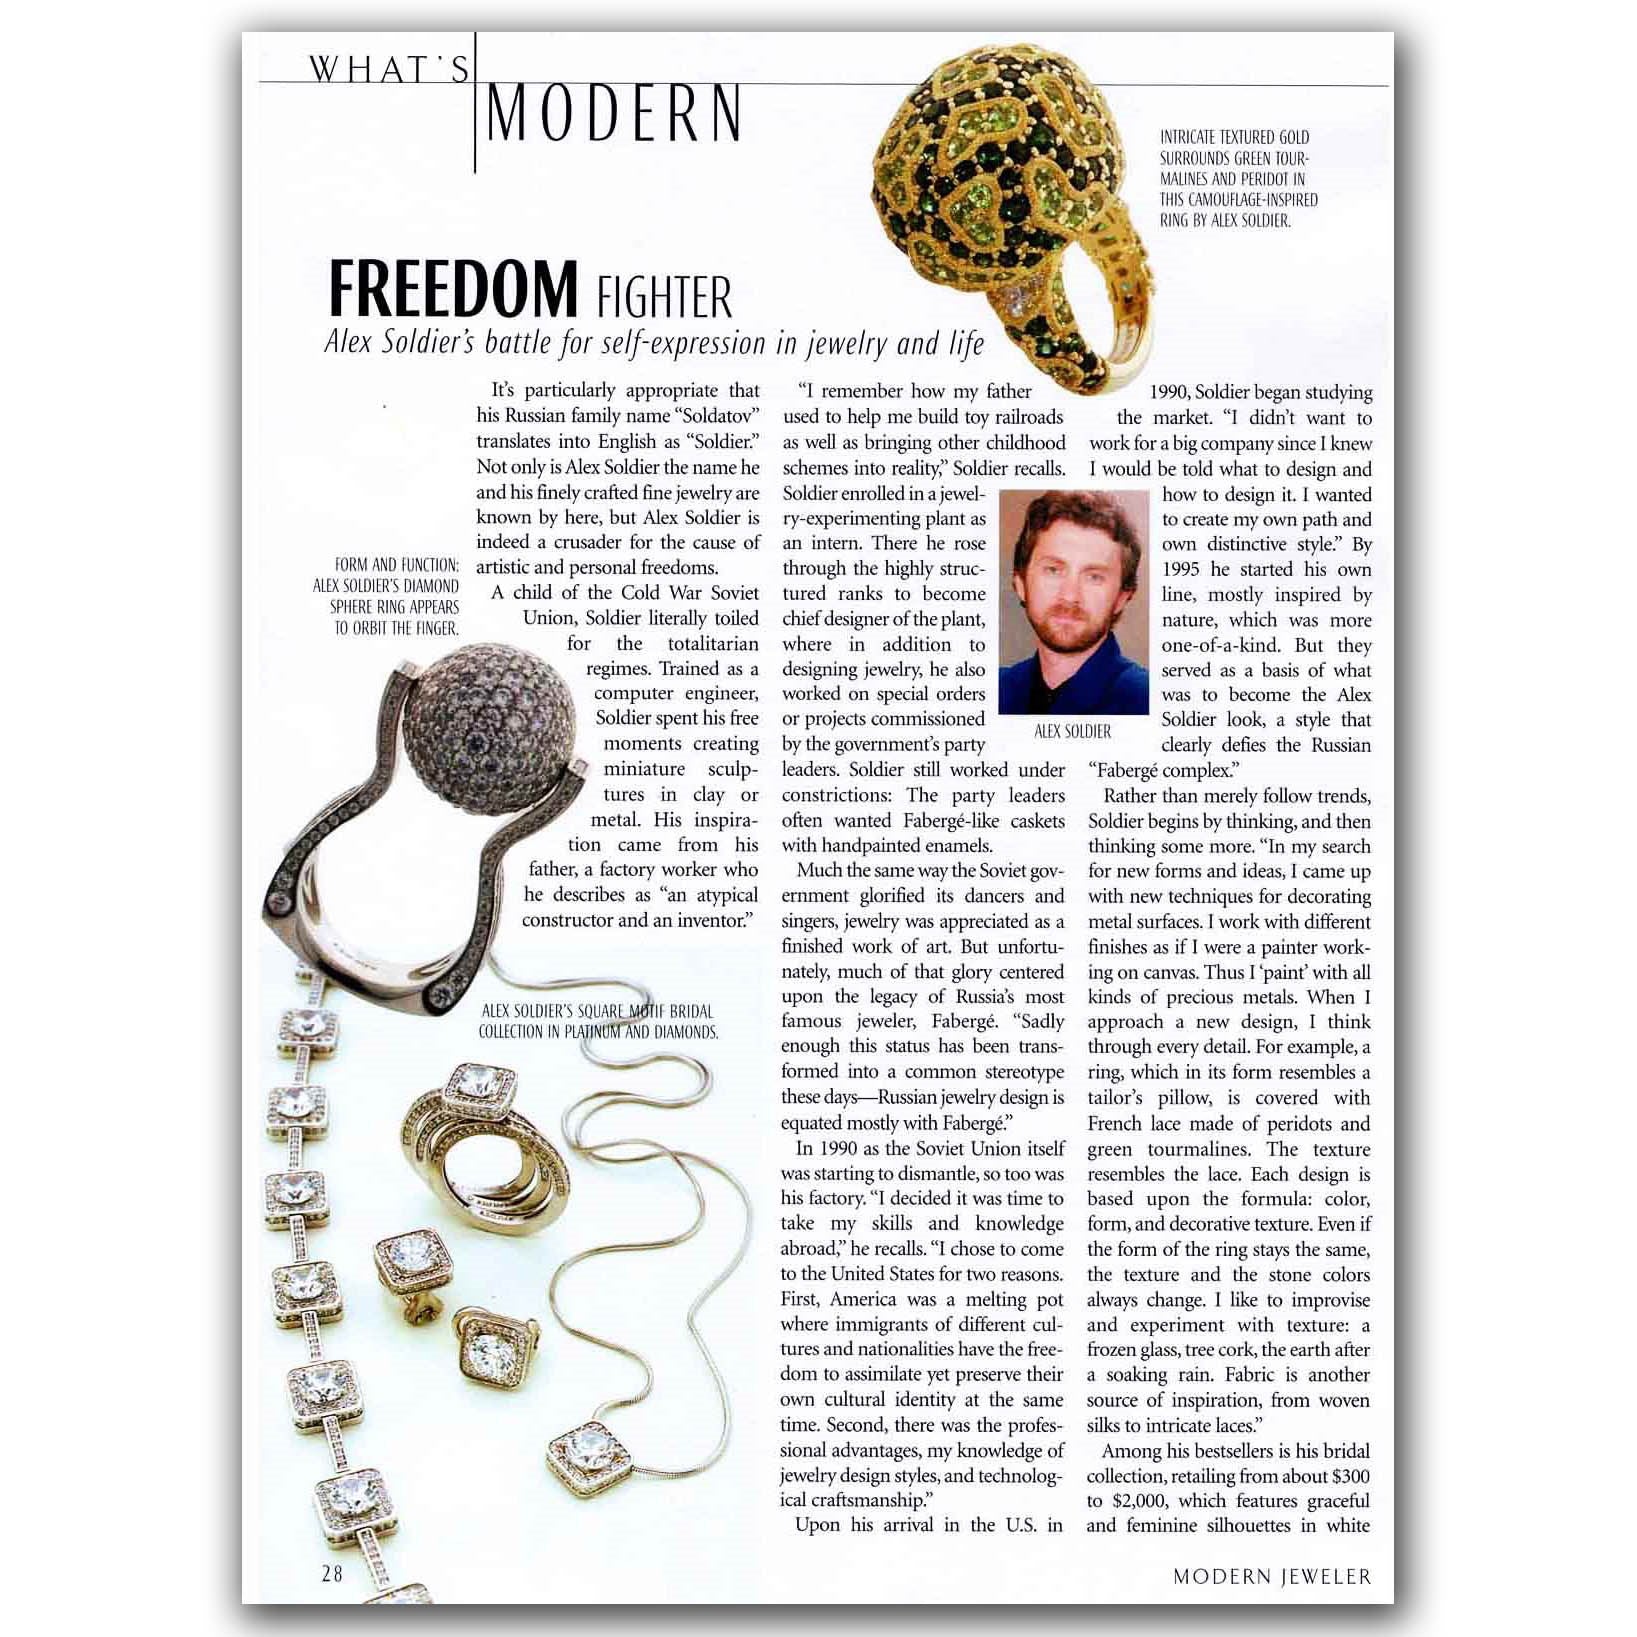 Excellent editorial in Modern Jeweller featuring the story of Alex Soldier.